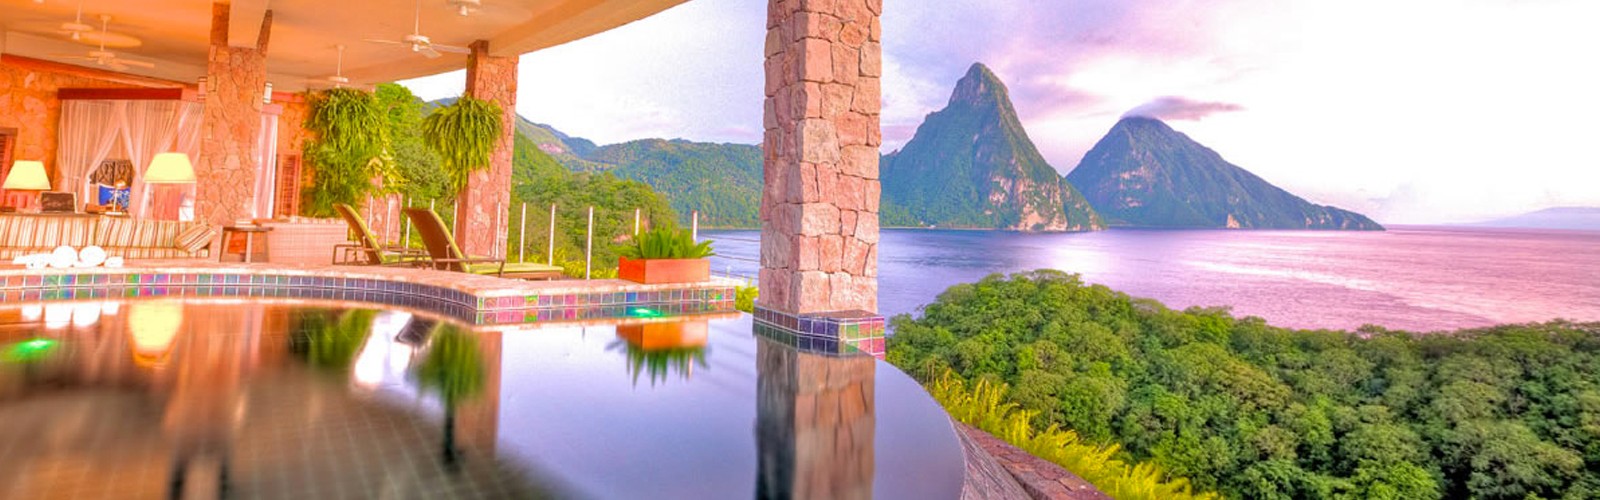 header-where-to-stay-in-st-lucia-luxury-st-lucia-holiday-packages